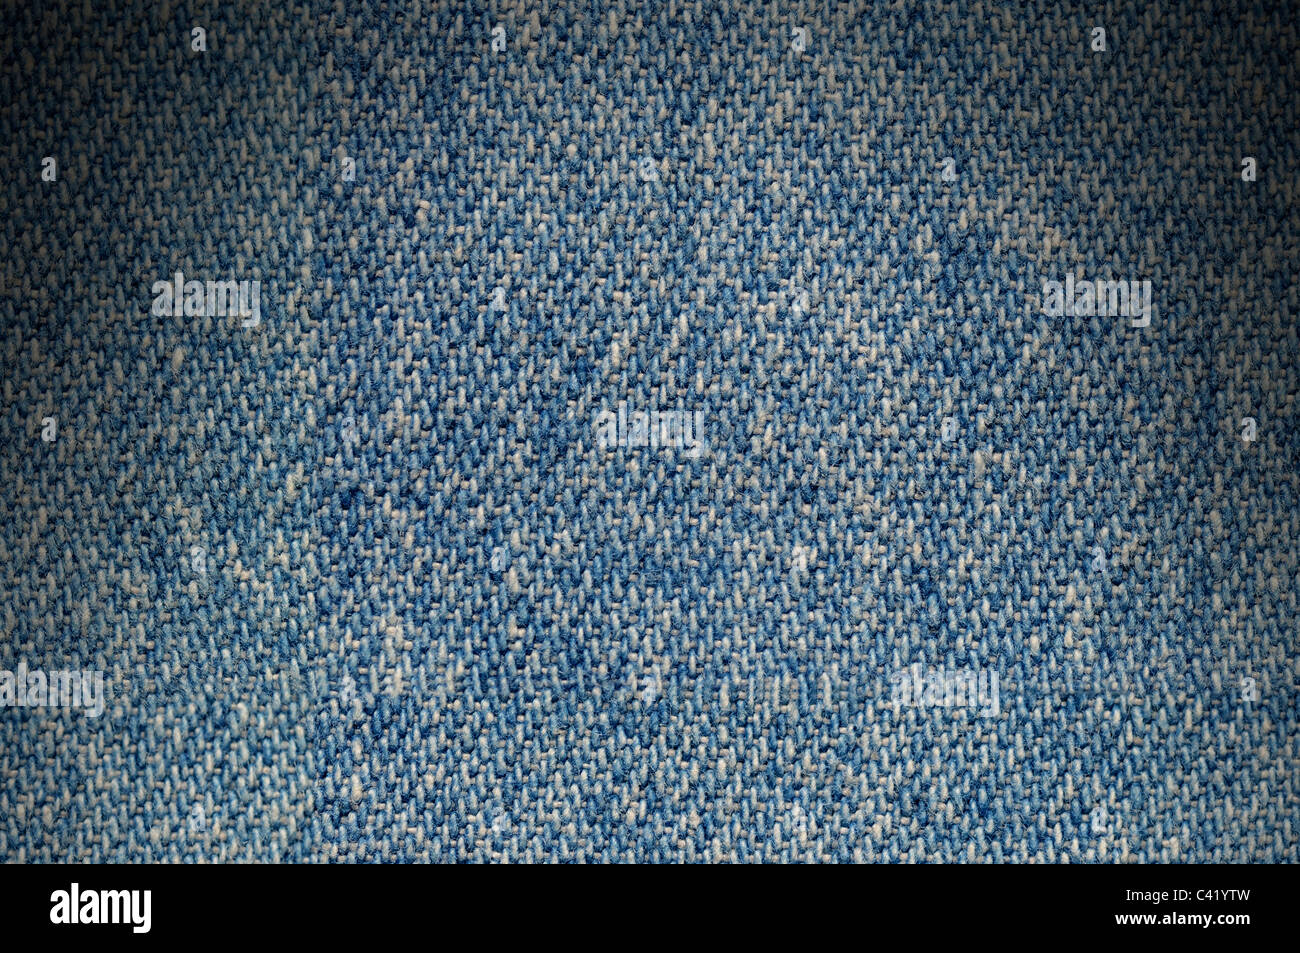 Blue denim fabric texture background lit dramatically from above Stock Photo